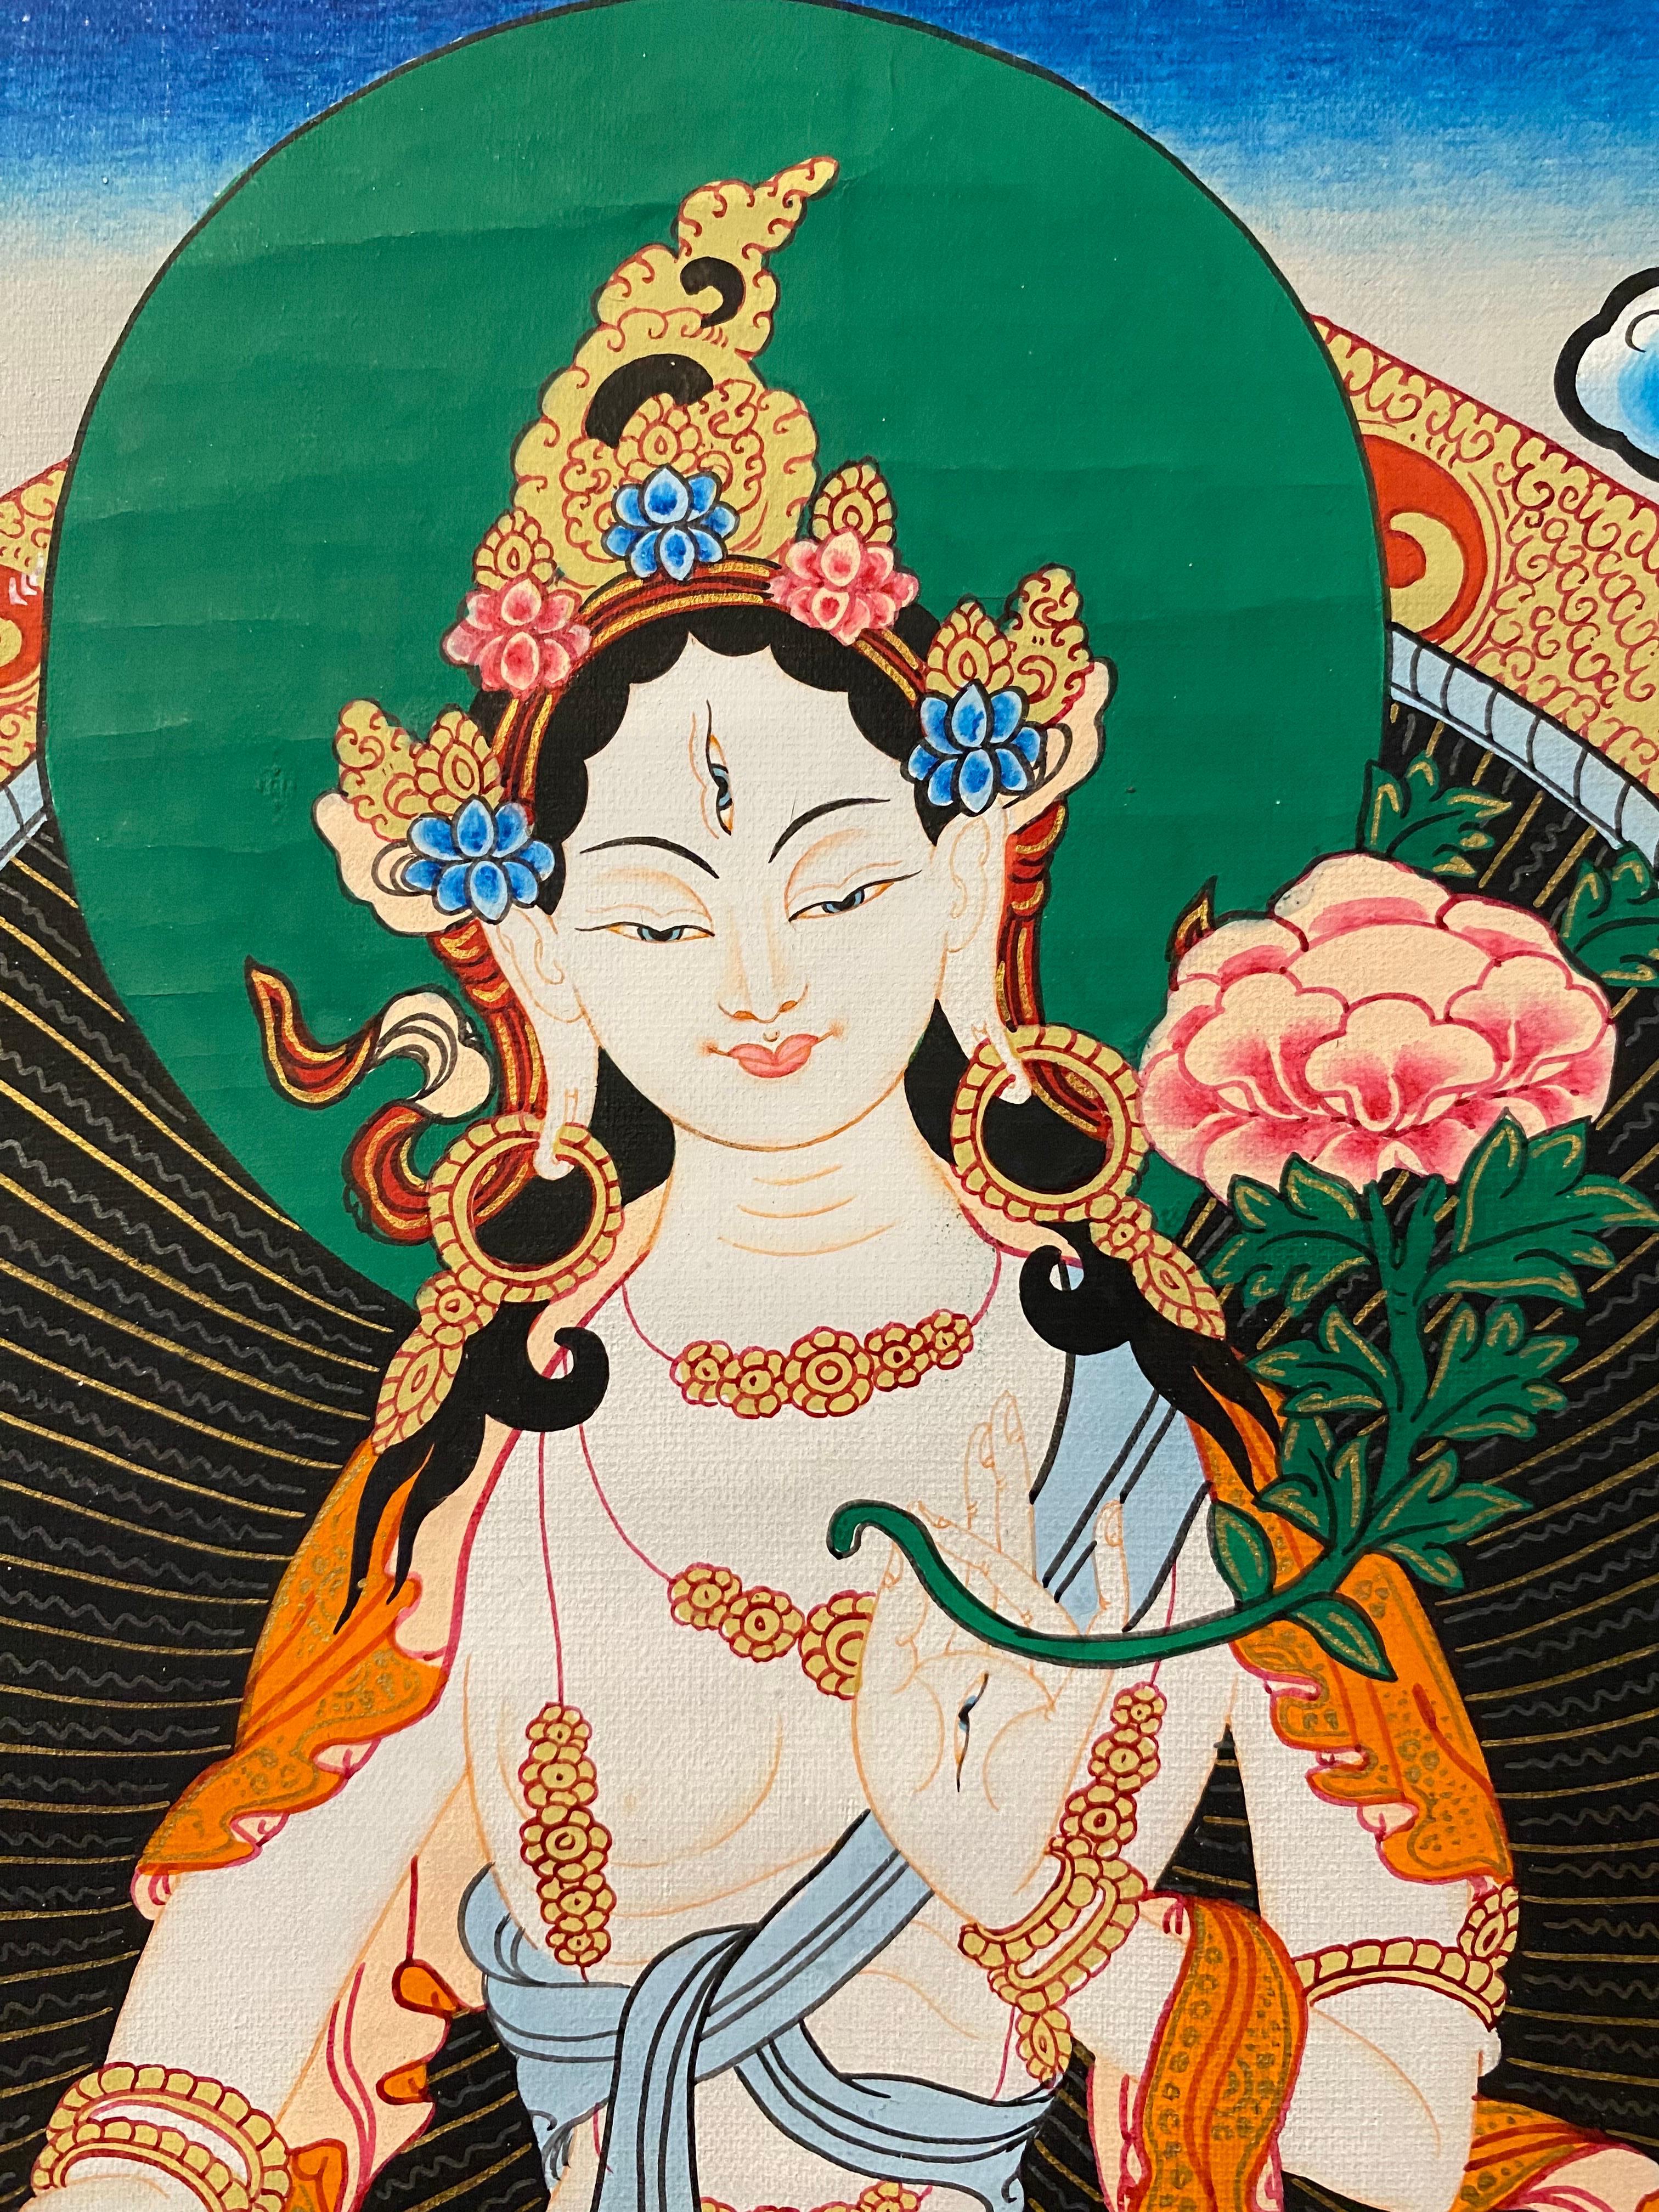 This unframed hand painted White Tara Thangka can be framed according to your choice and give it a place at your  home to promote long life, peace, prosperity and health through her enlightened activities, both for the practitioner and for others.